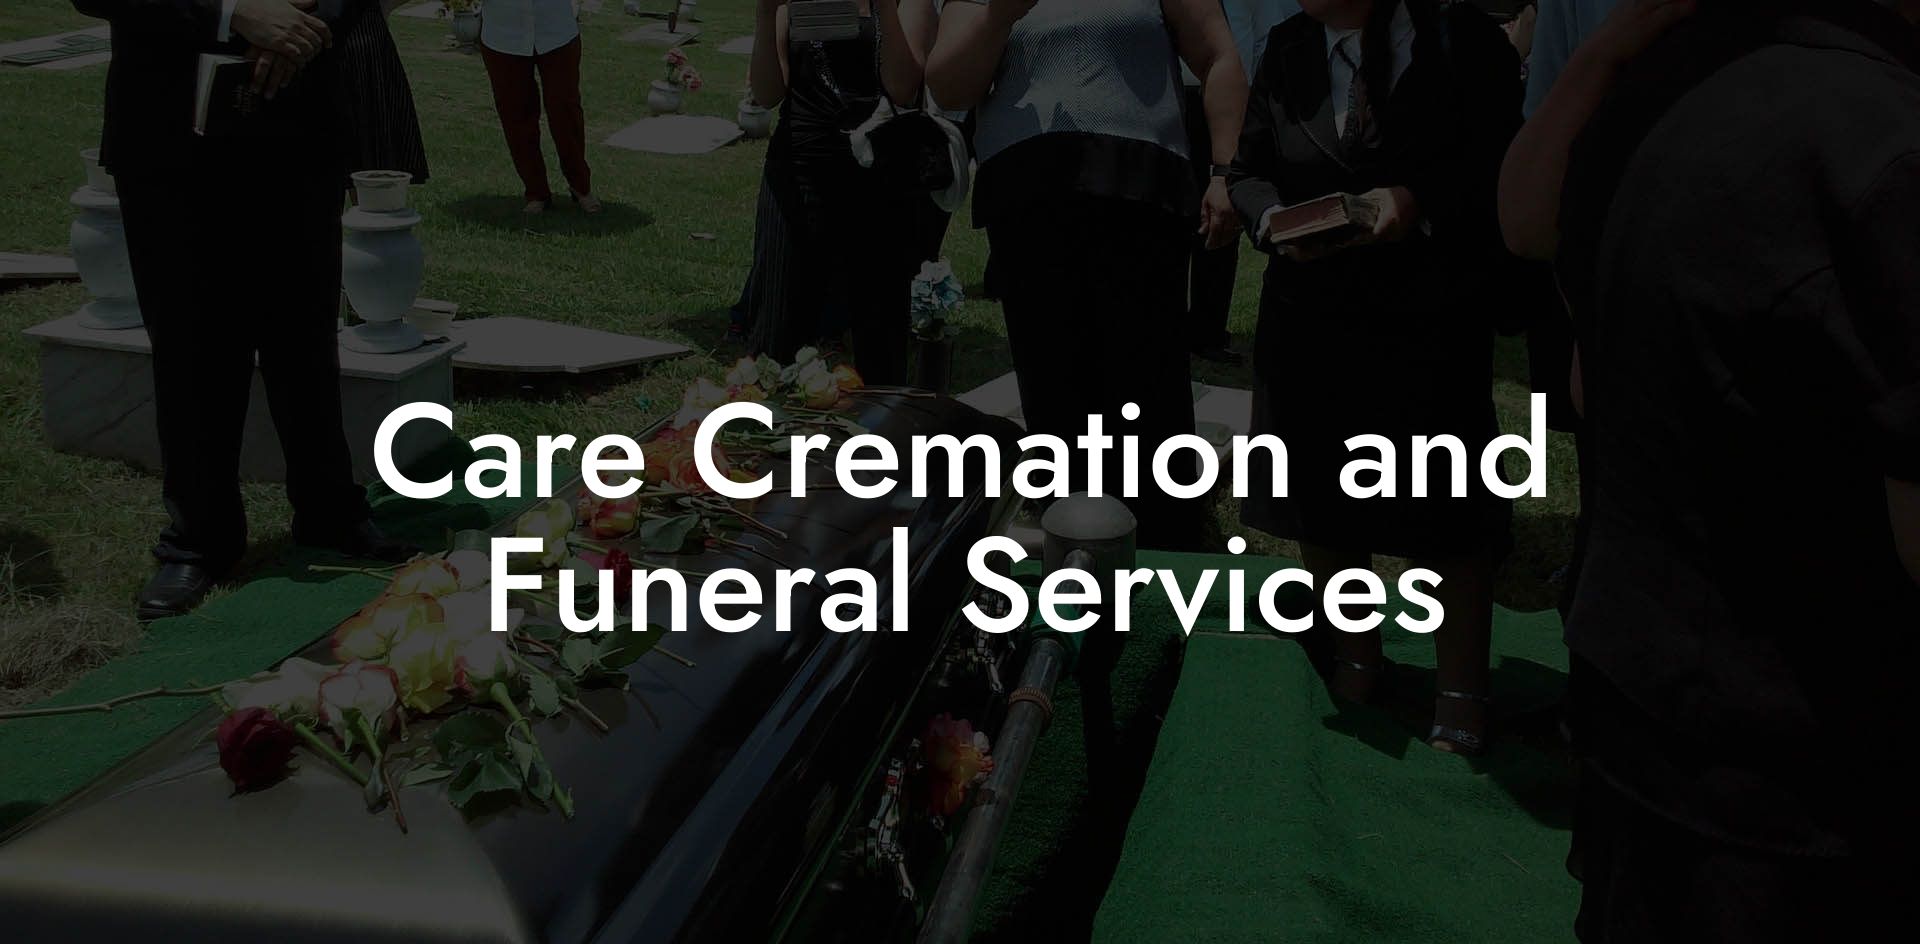 Care Cremation and Funeral Services